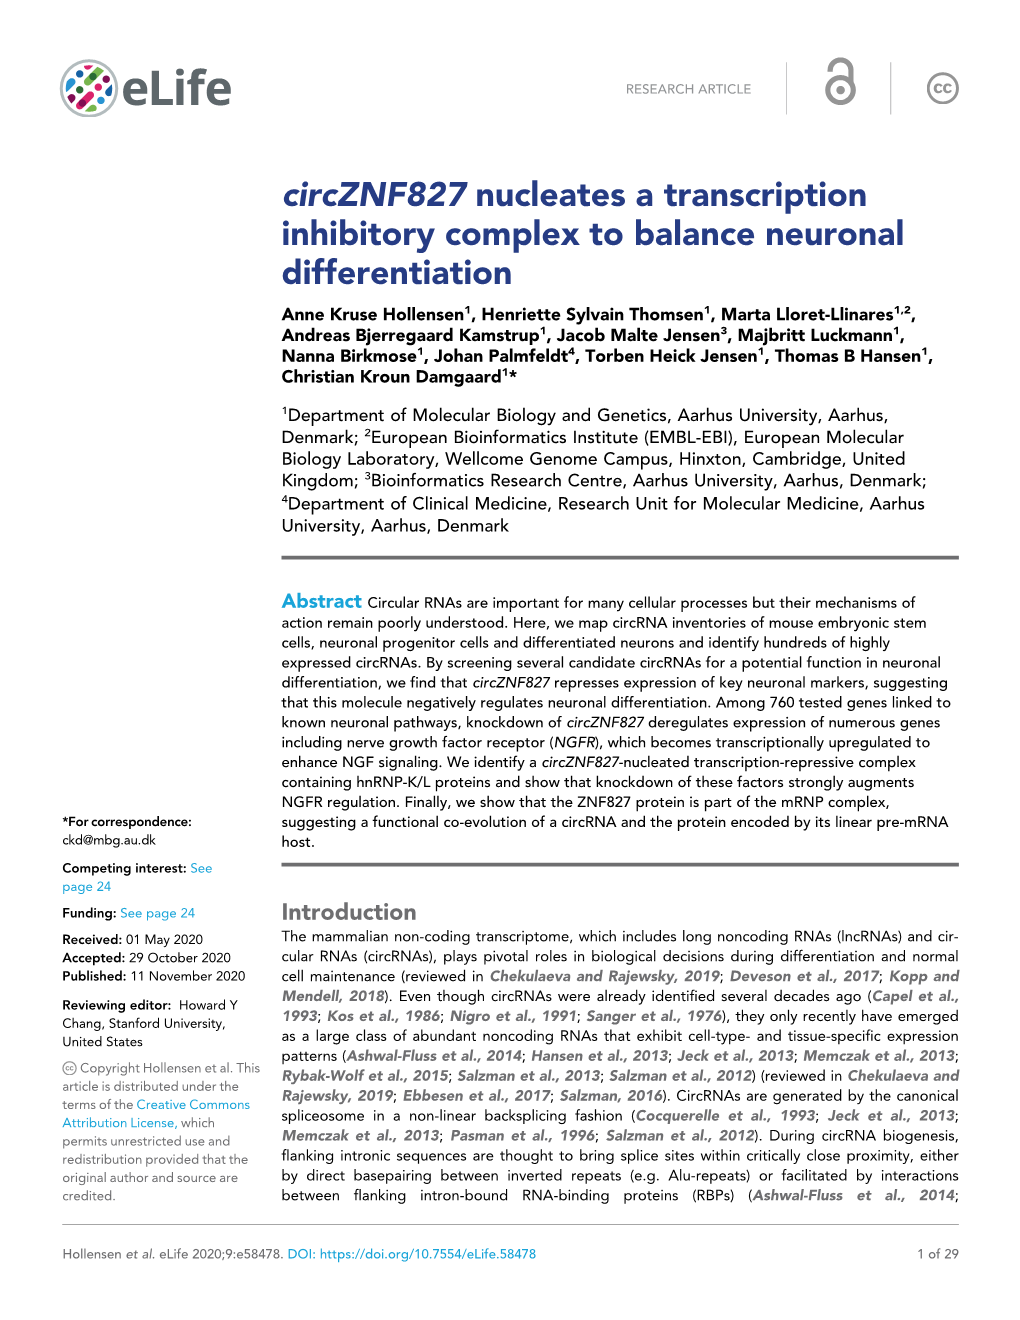 Circznf827 Nucleates a Transcription Inhibitory Complex to Balance